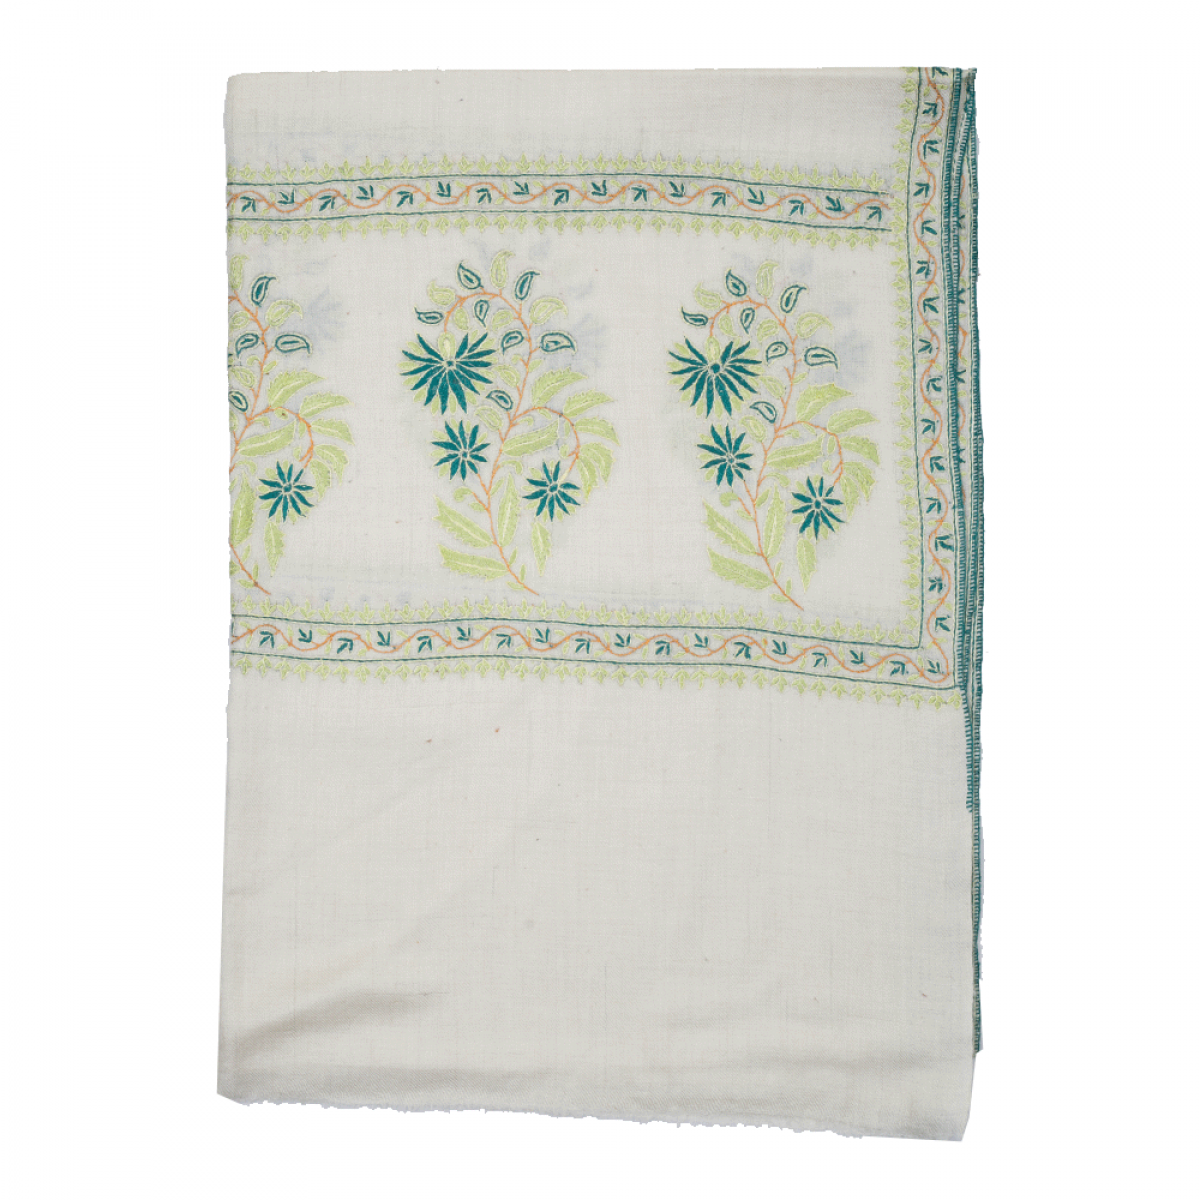 Embroidered Pashmina Stole - Off White & Green